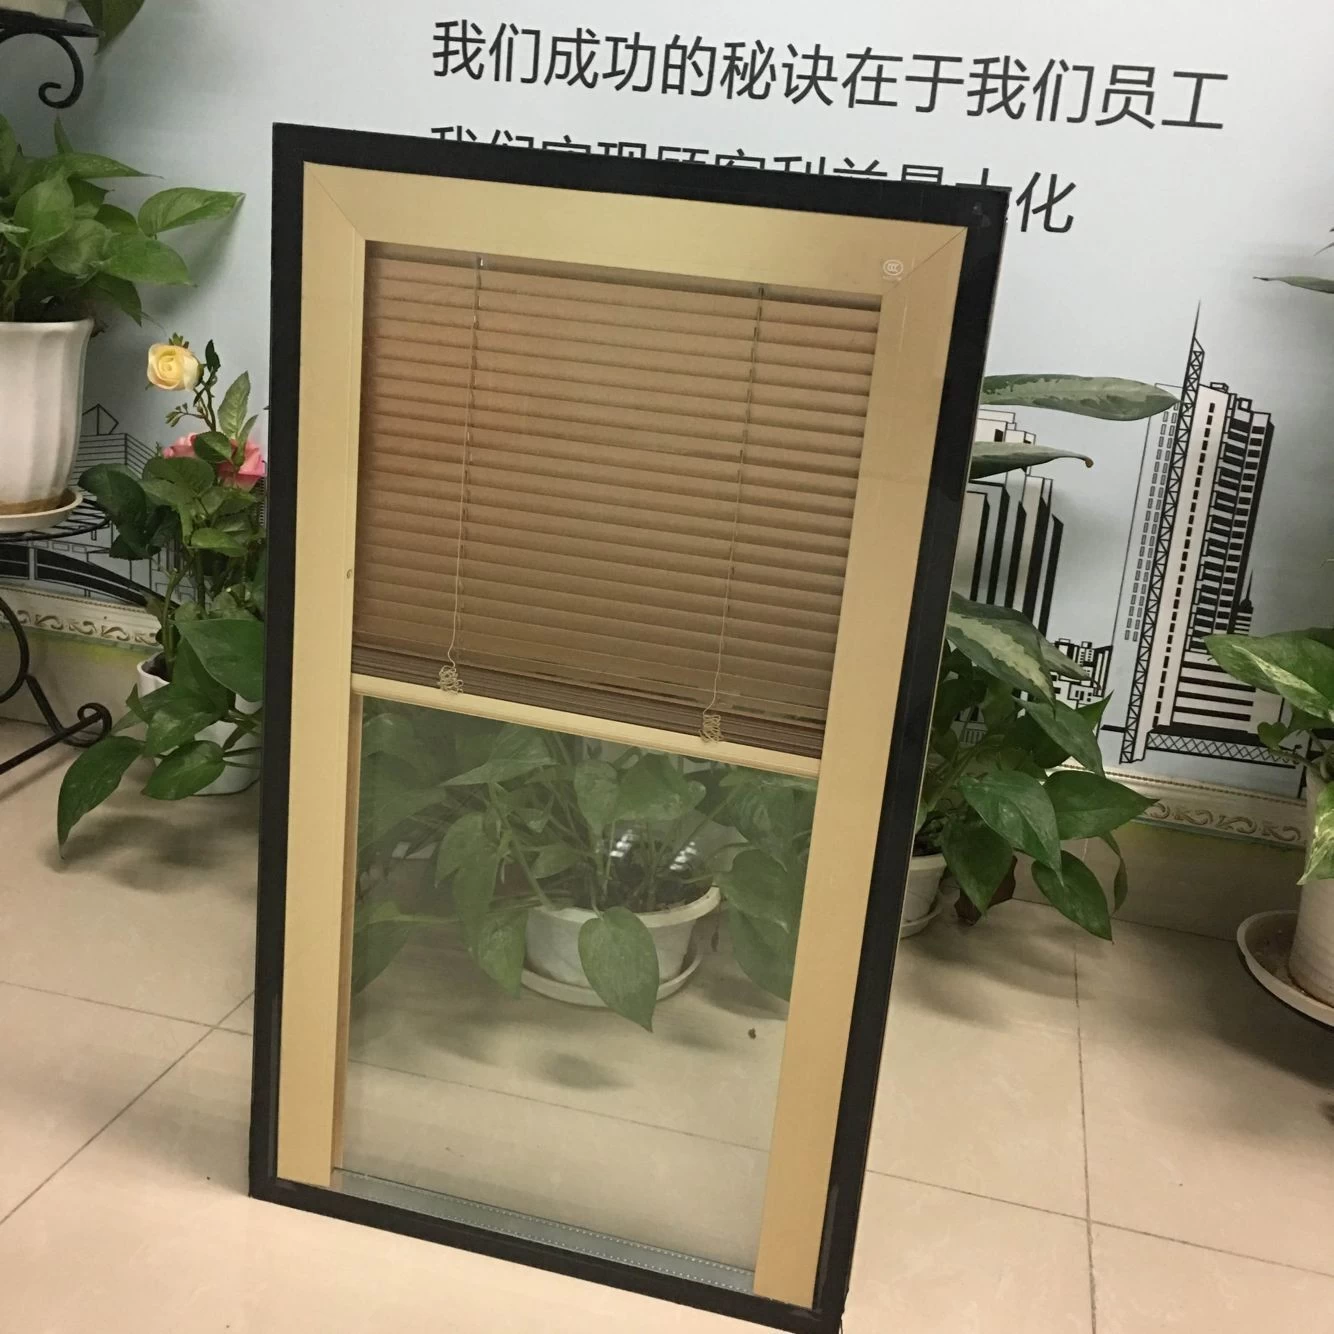 internally installed louver insulated glass for window,louver IGU glass window,energy saving inner installed louver hollow glass